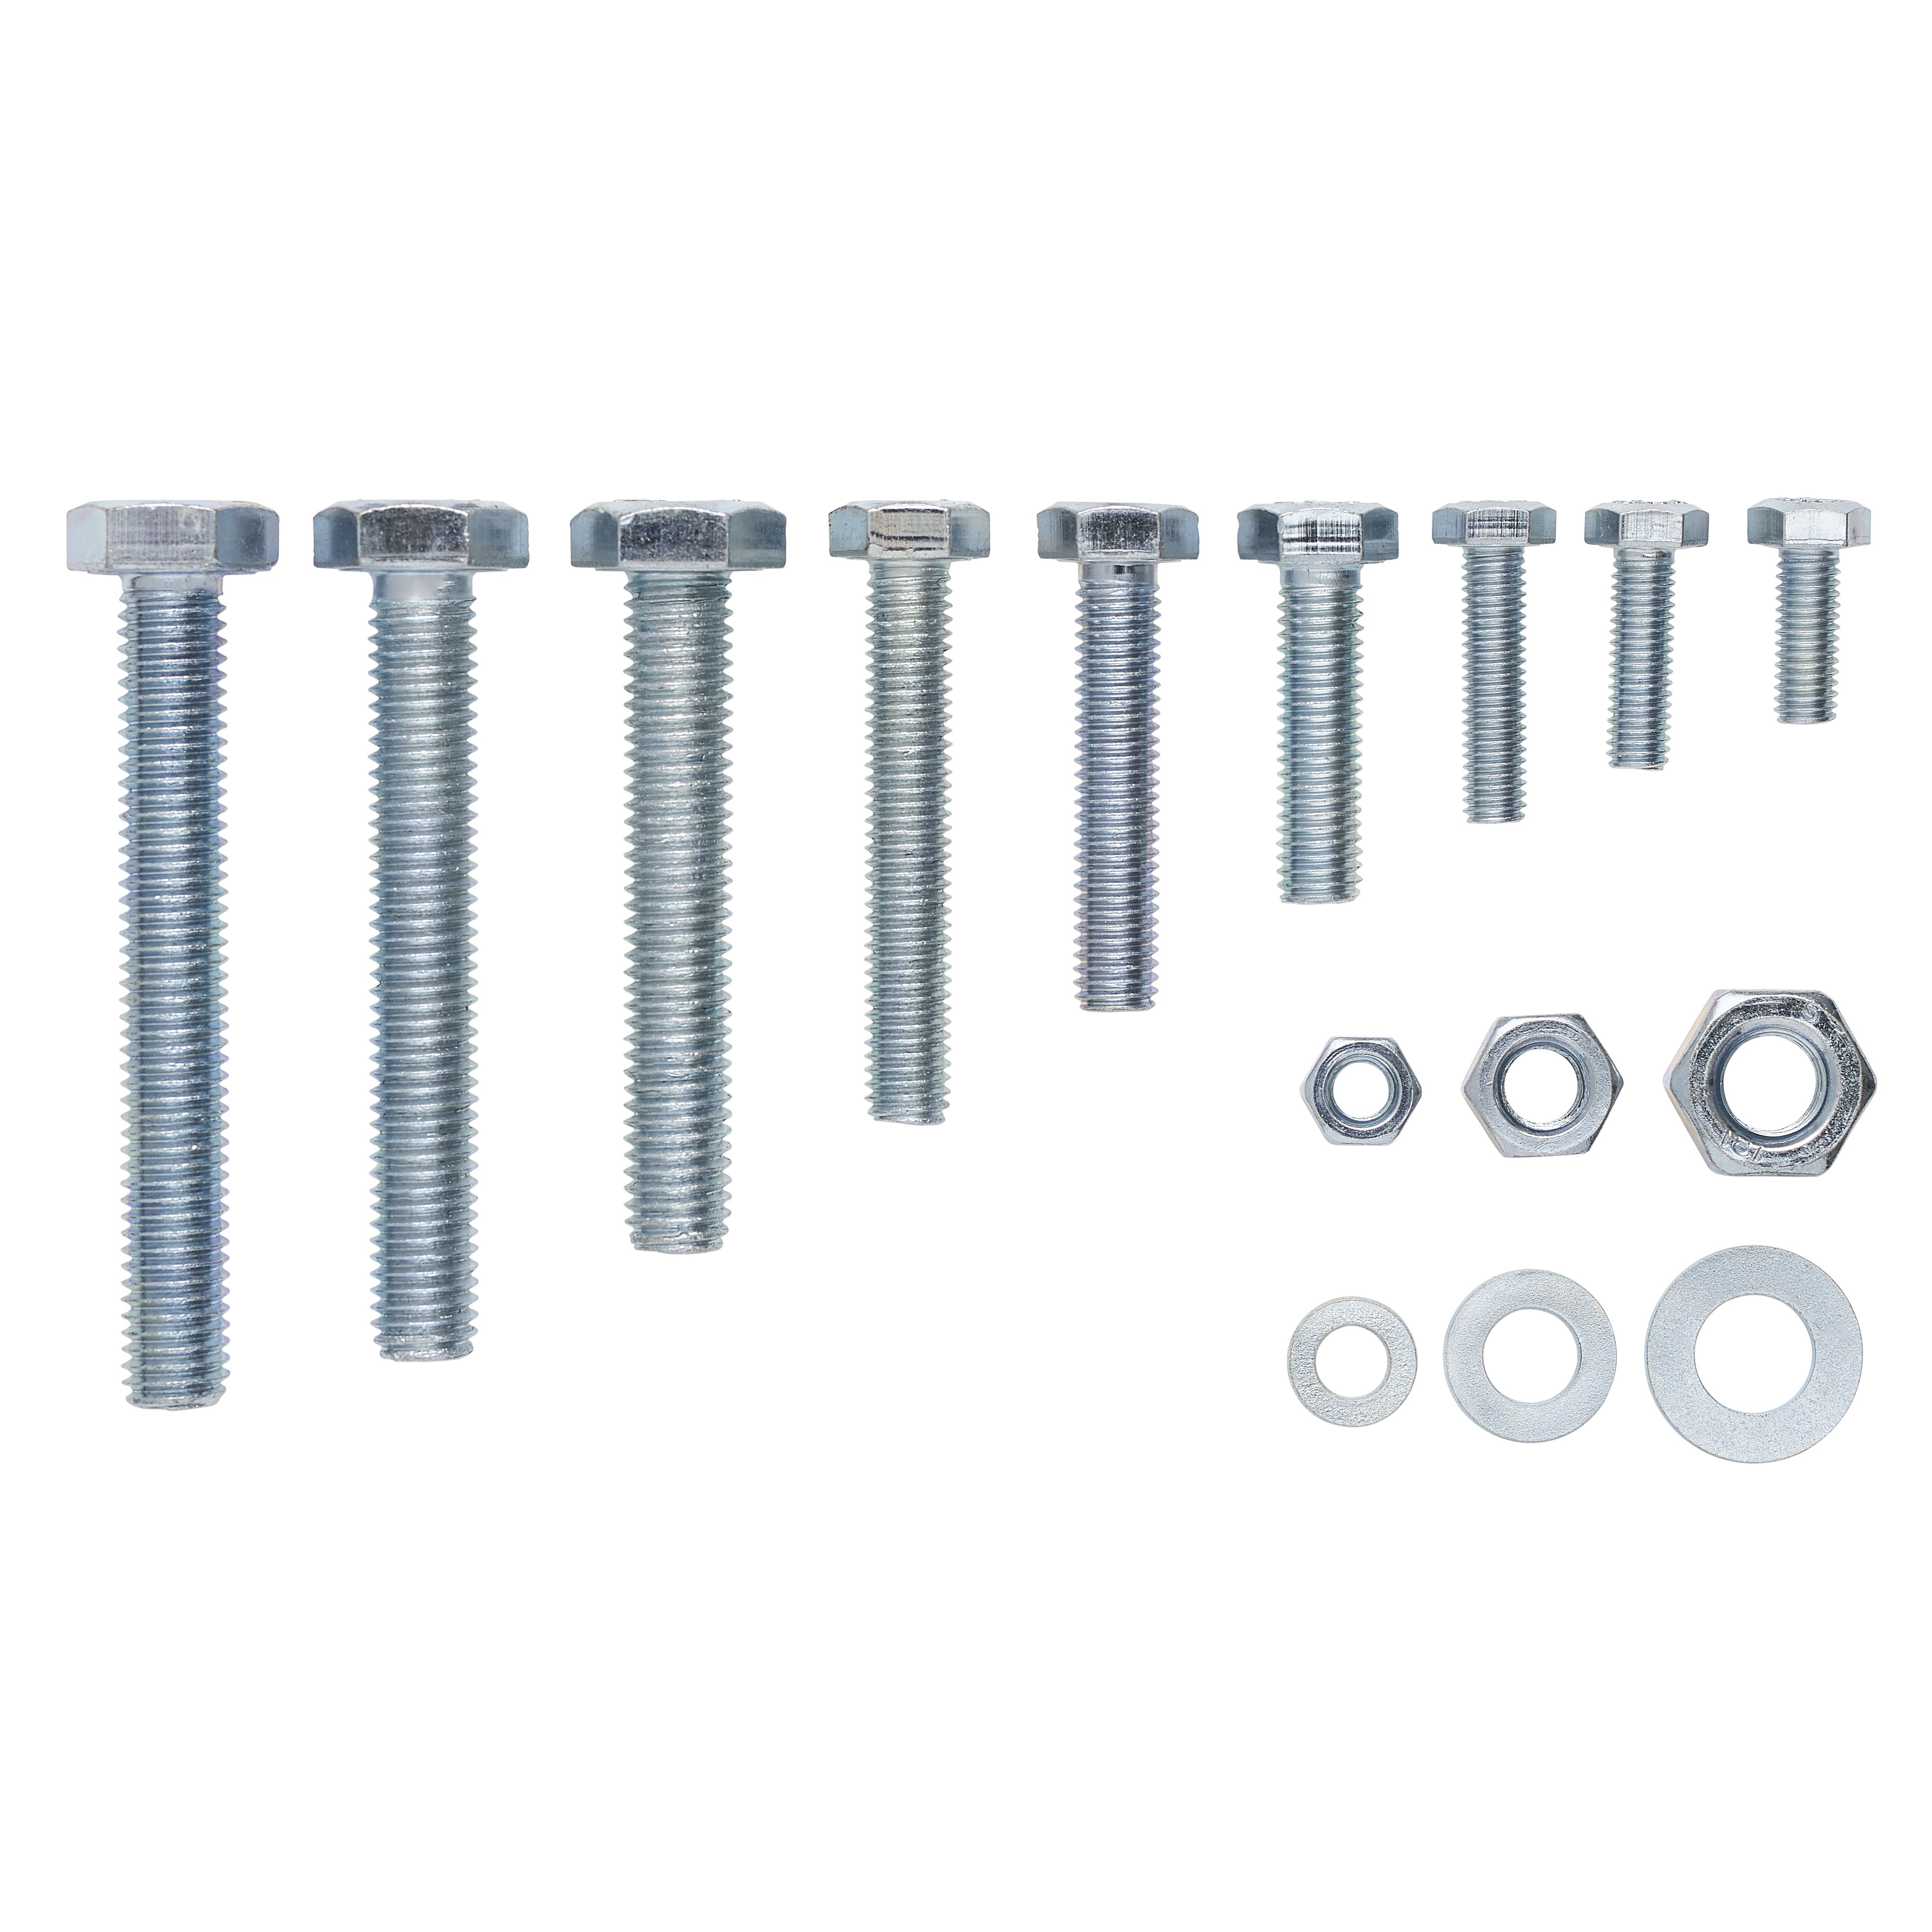 Diall Hex Carbon steel (grade 4.8) Bolt, nut & washer, Pack of 500